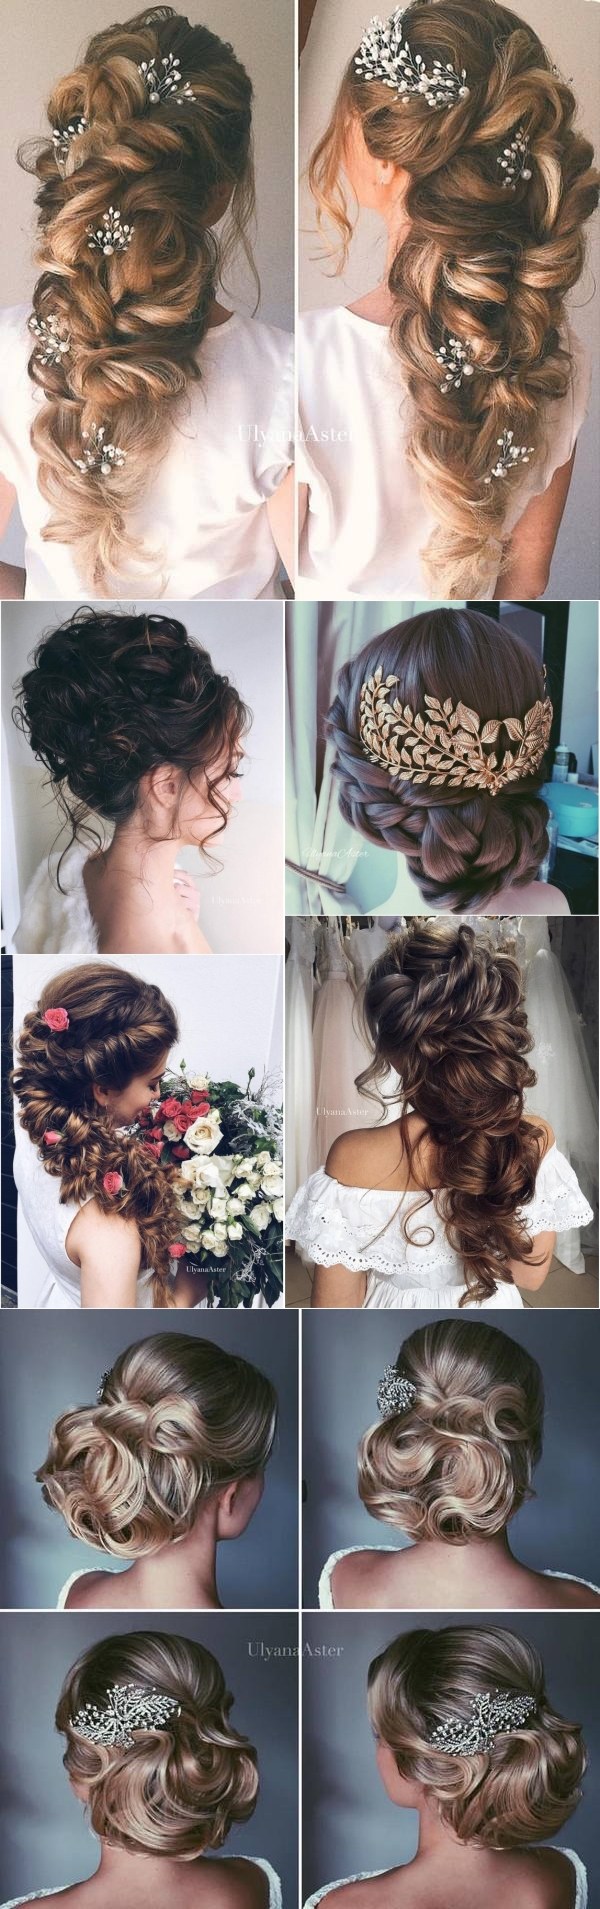 Ulyana Aster Wedding Hairstyles for Long Hair